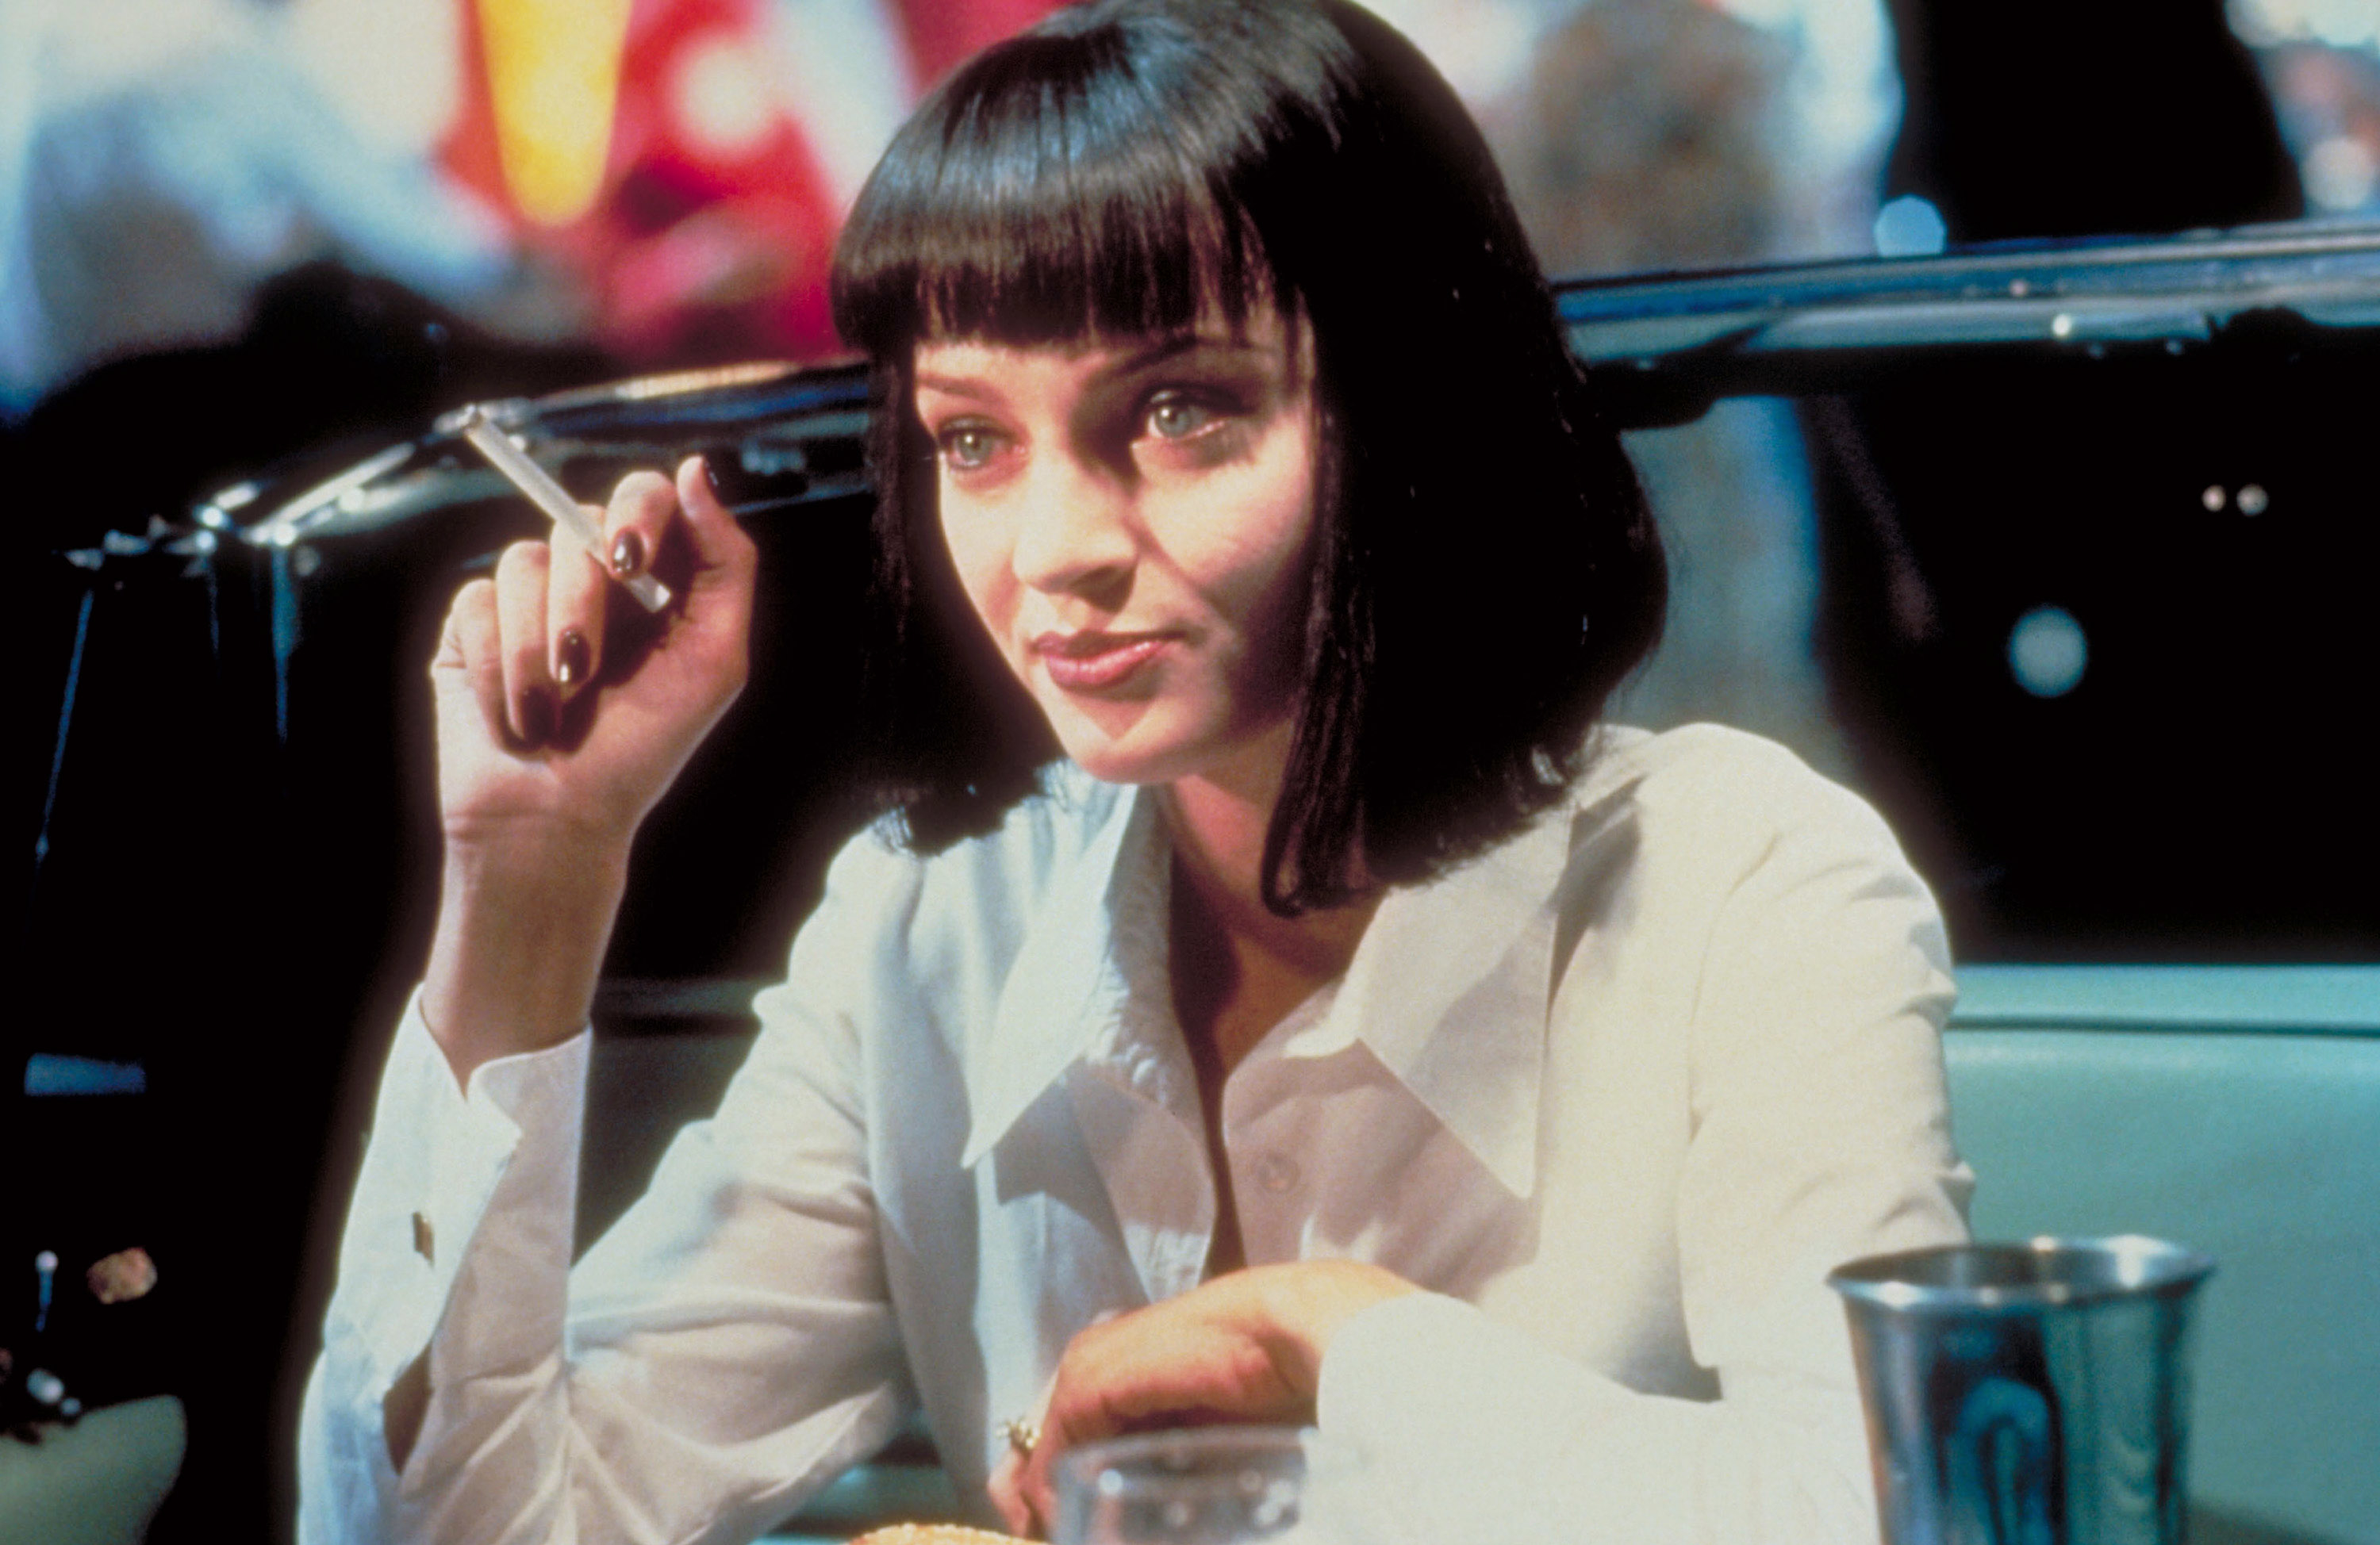 Mia Wallace from Pulp Fiction, seated in a diner booth, with a pen in hand and a bob haircut